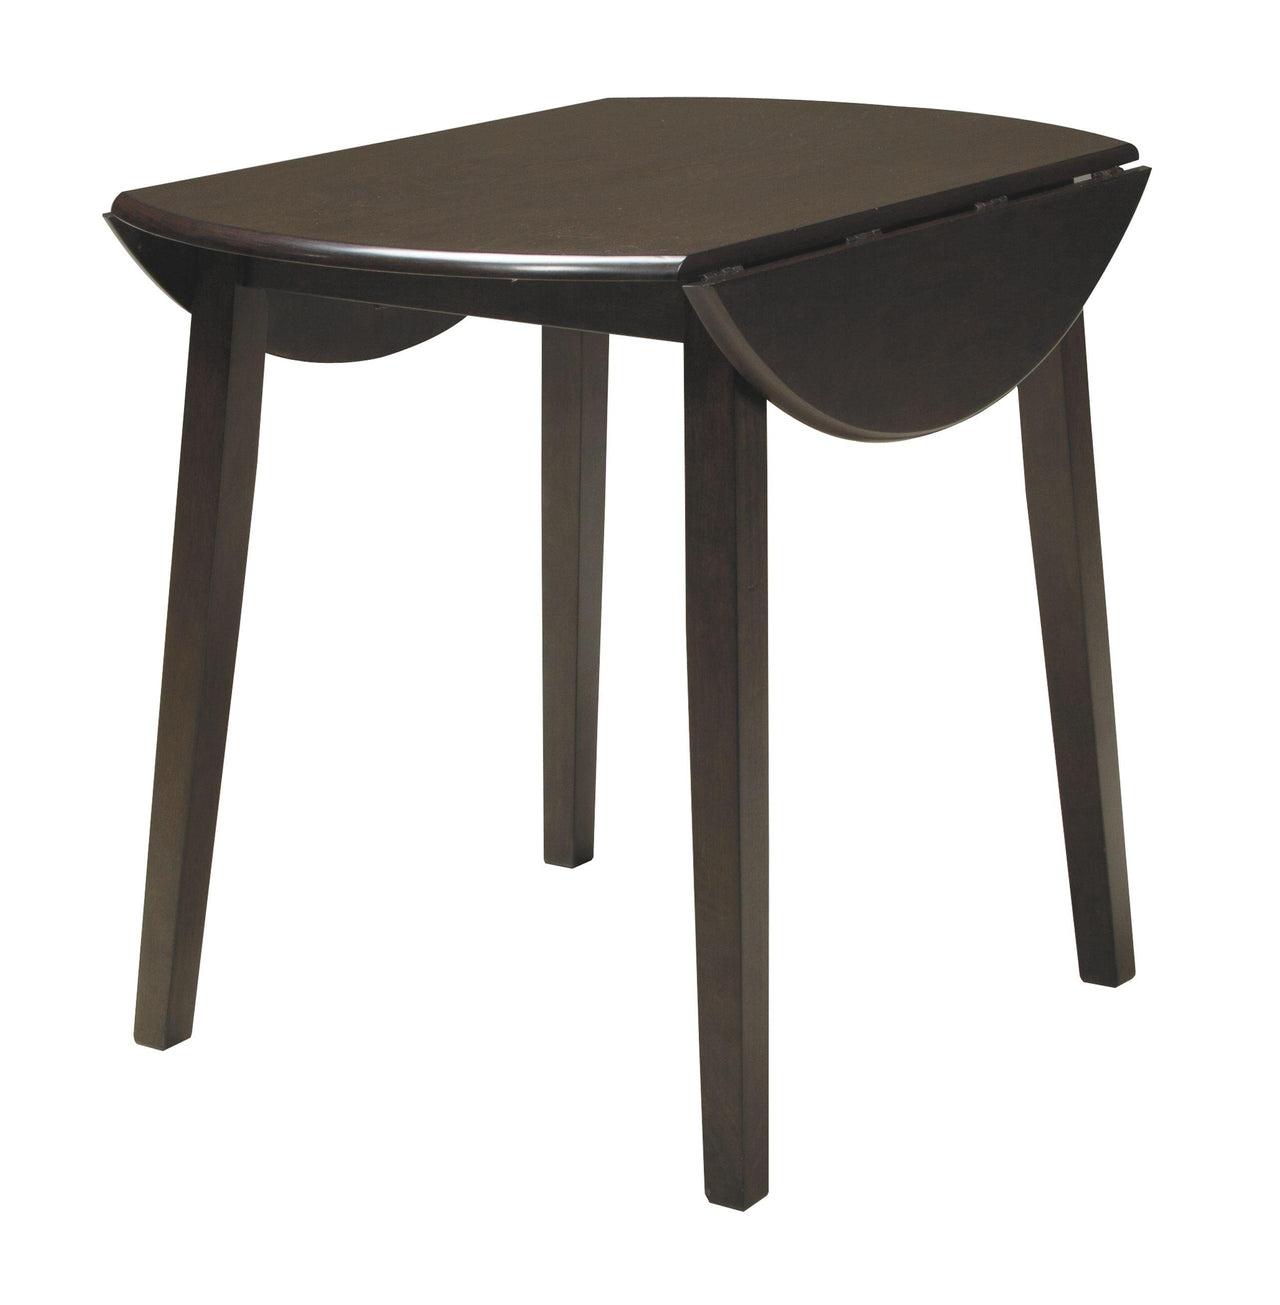 Hammis - Dark Brown - Round Drm Drop Leaf Table Tony's Home Furnishings Furniture. Beds. Dressers. Sofas.